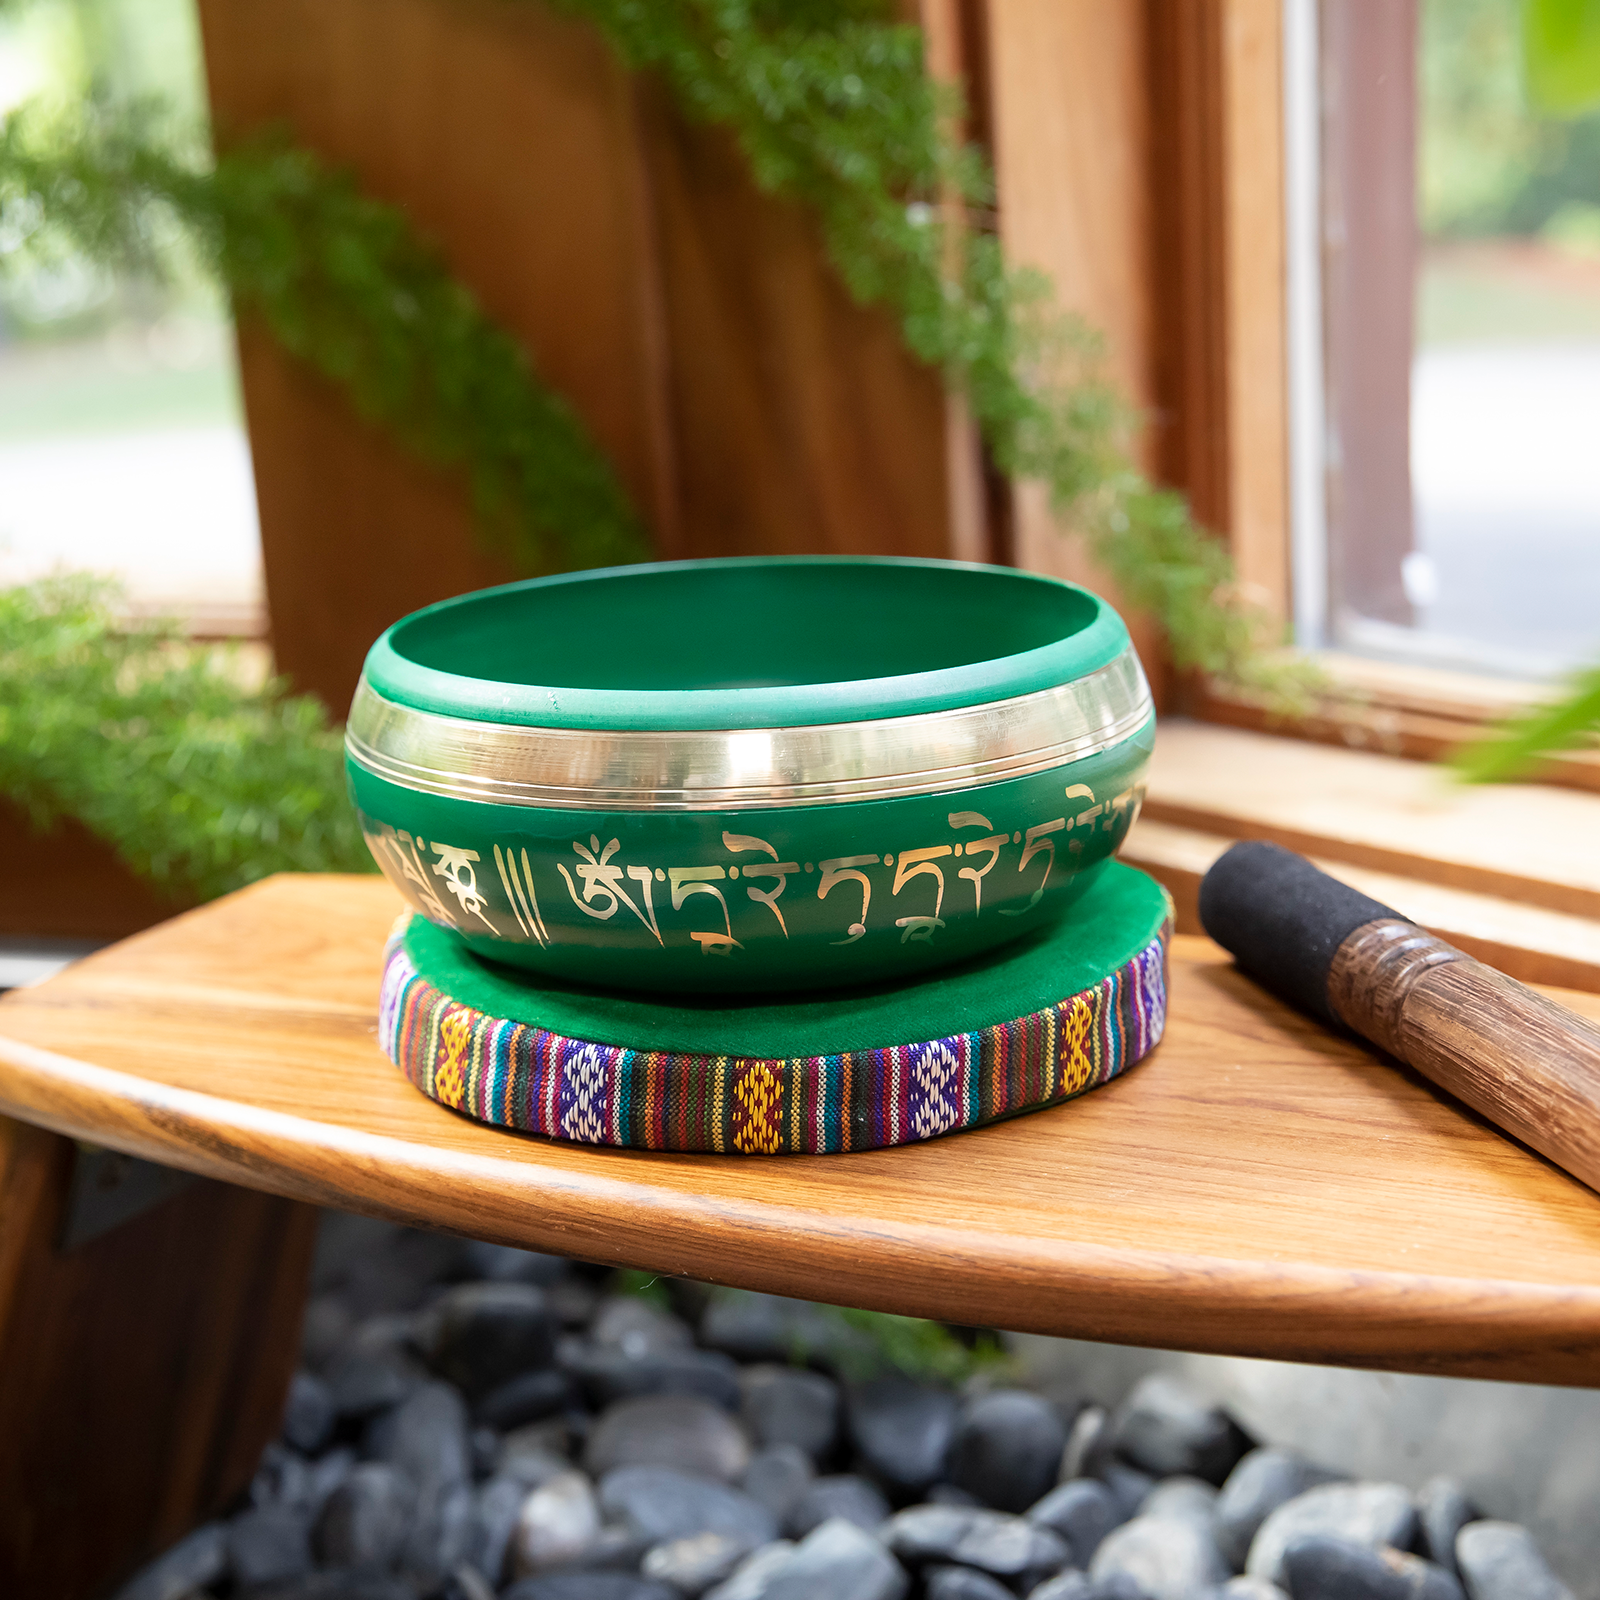 The Green Tara Singing Bowl rests atop a cushion and wooden meditation stool, mallet at its side. Plants and rocks can be seen under and around the subject.